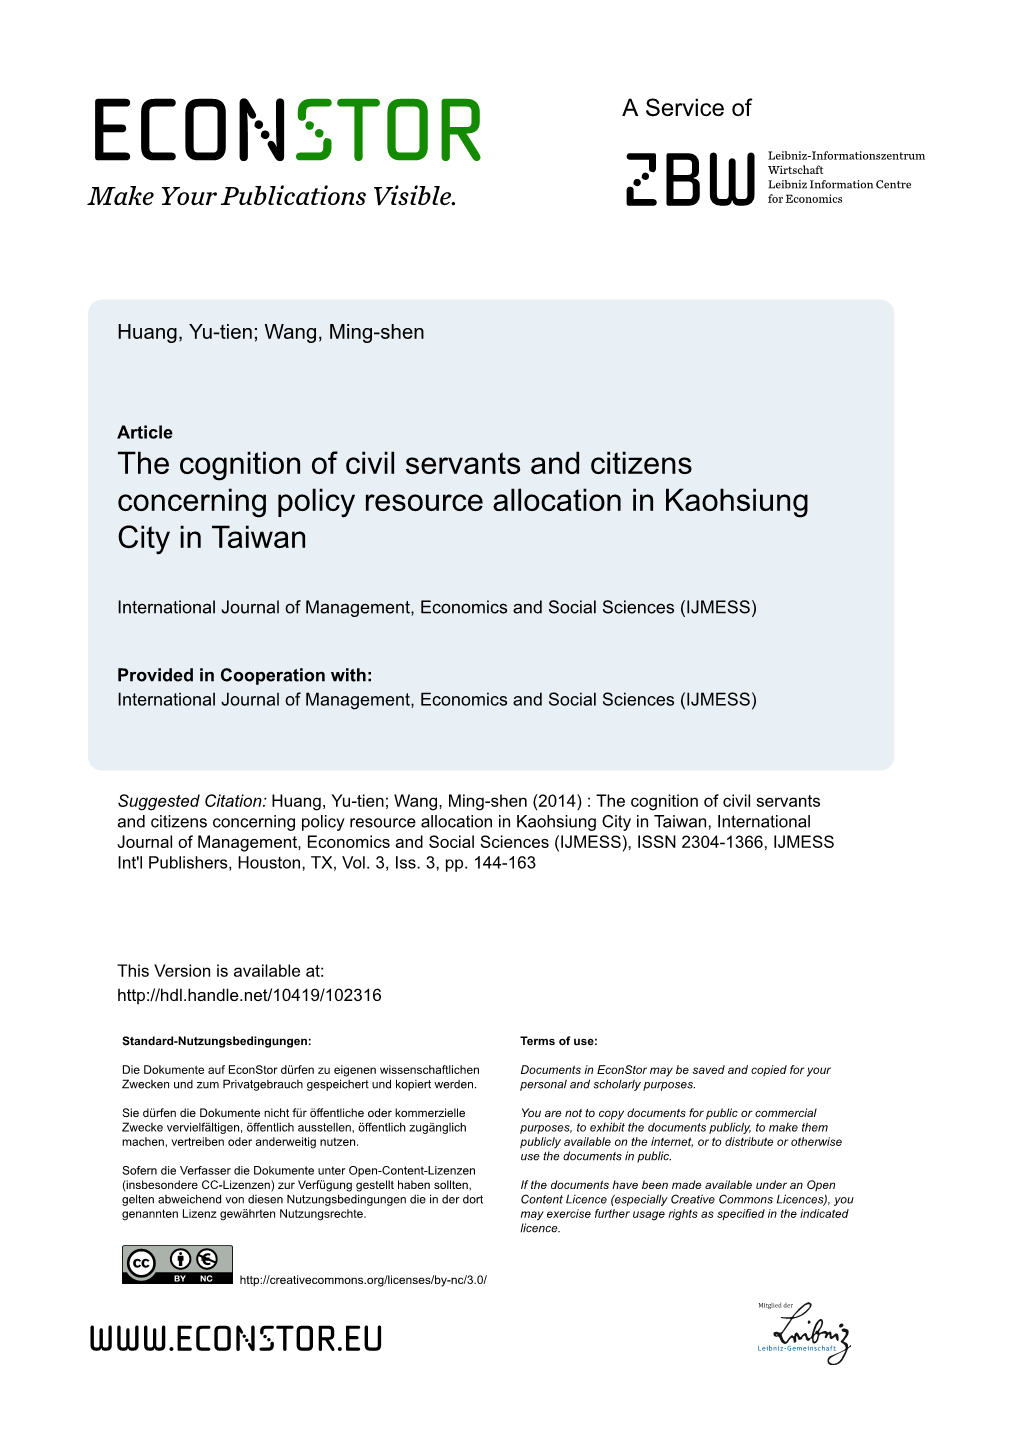 The Cognition of Civil Servants and Citizens Concerning Policy Resource Allocation in Kaohsiung City in Taiwan